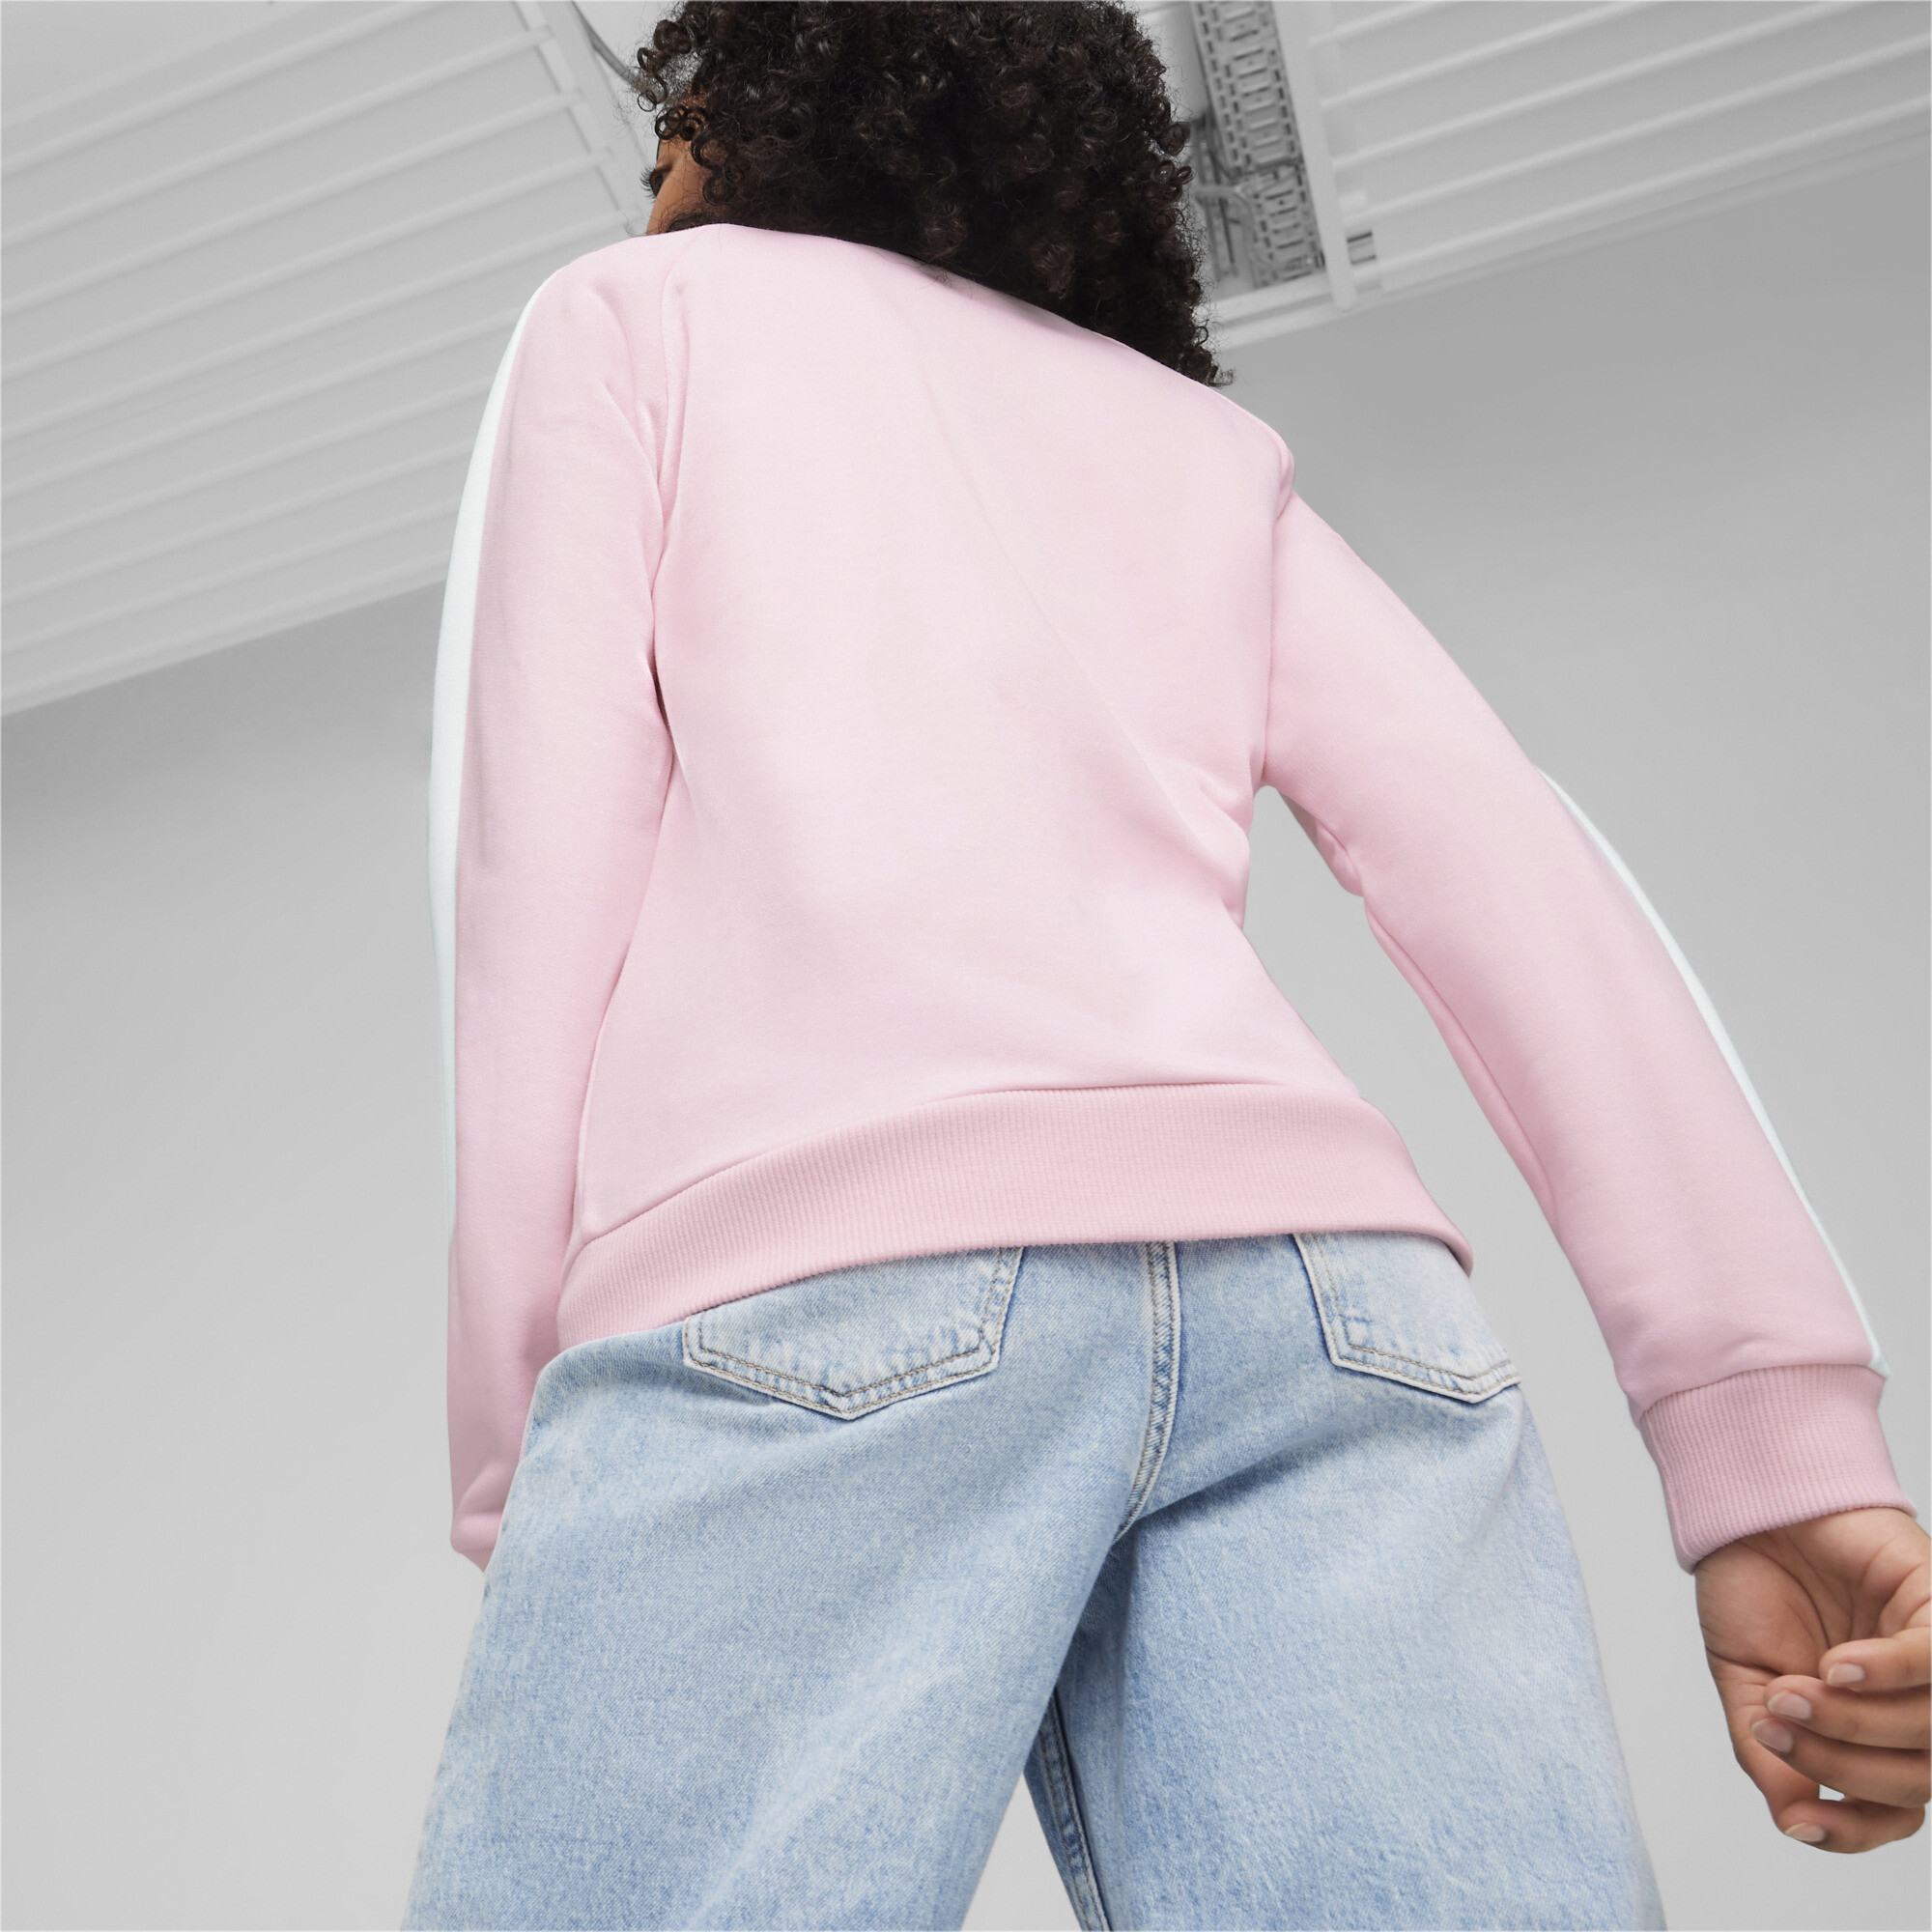 PUMA Classics T7 Track Jacket In Pink, Size 5-6 Youth